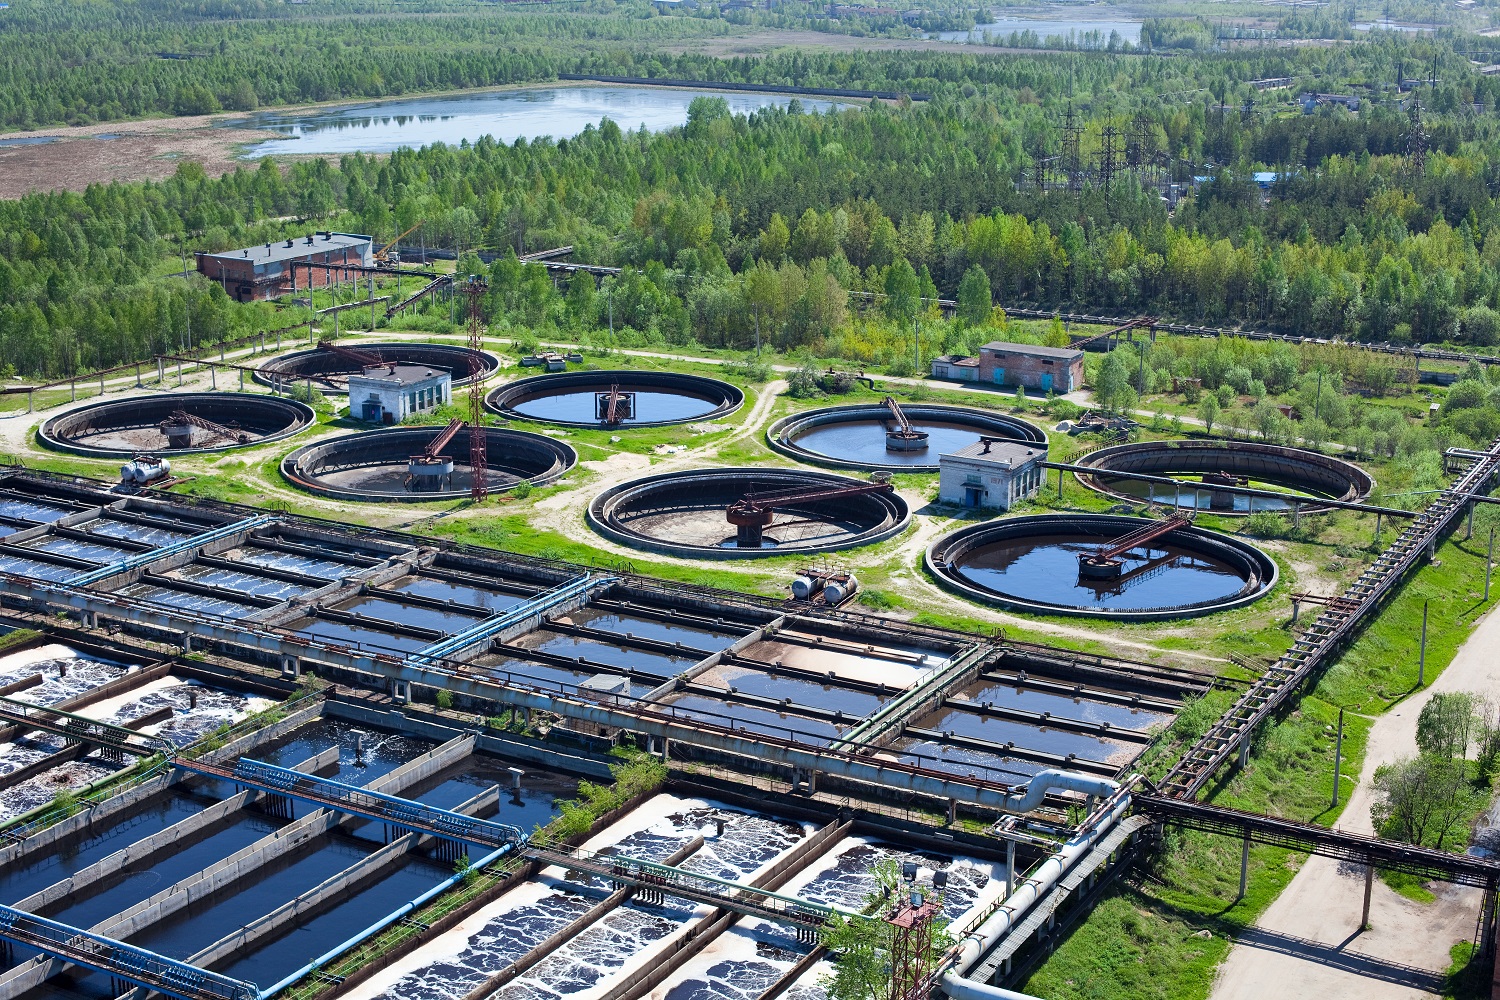 Treating wastewater to make it available for other uses such as irrigation is an important solution for water scarcity, but can pose risks to health and the environment if water quality and methods of treatment are not appropriate. (Image: Shutterstock)